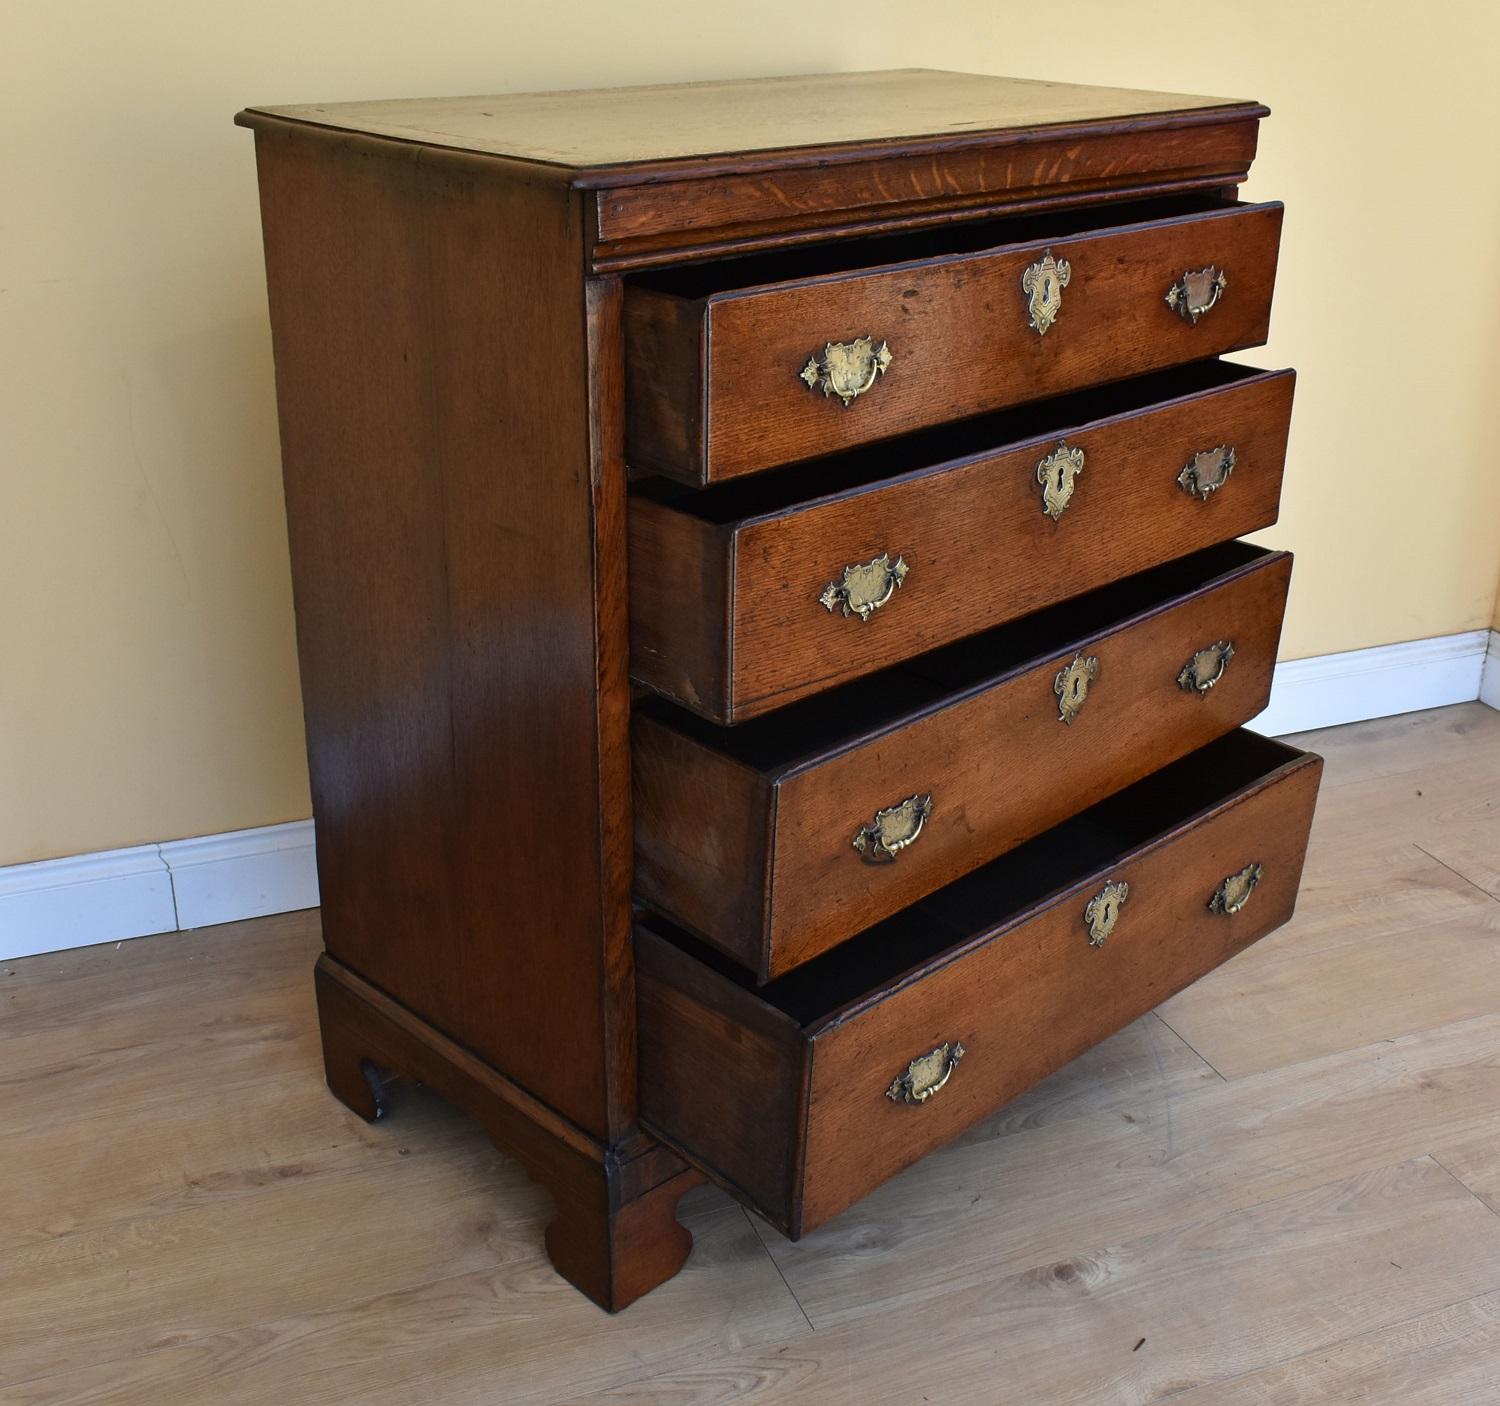 For sale is a good quality George III oak chest of drawers. The top of the chest has a banded top, above an arrangement of four graduated drawers, each with brass handles and escutcheons. This piece stands on bracket feet and is in very good